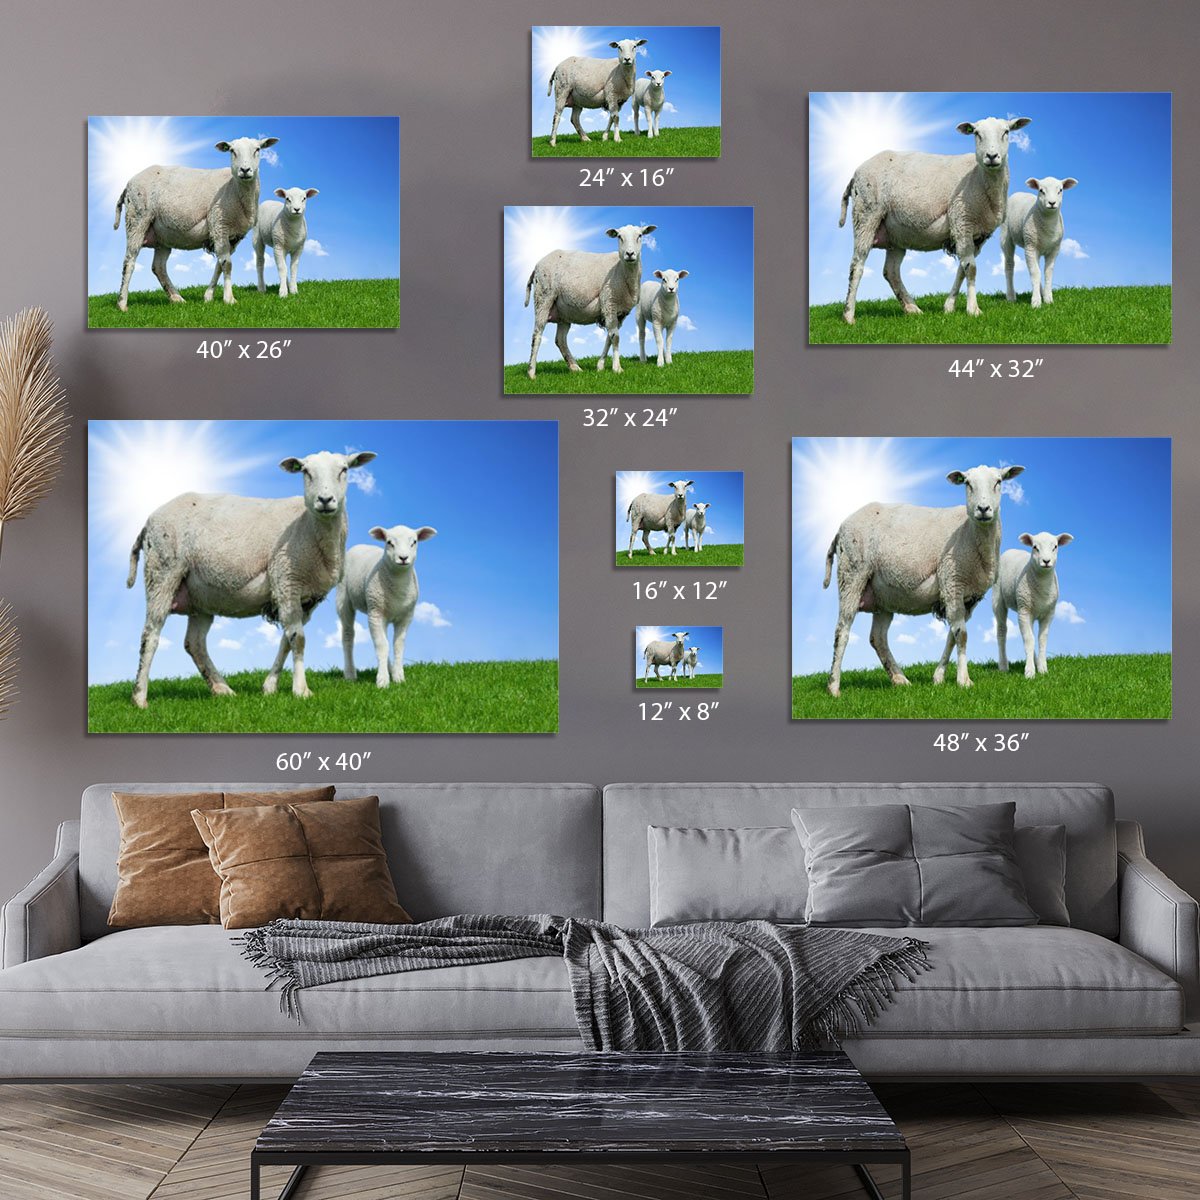 Mother sheep and her lamb in spring Canvas Print or Poster